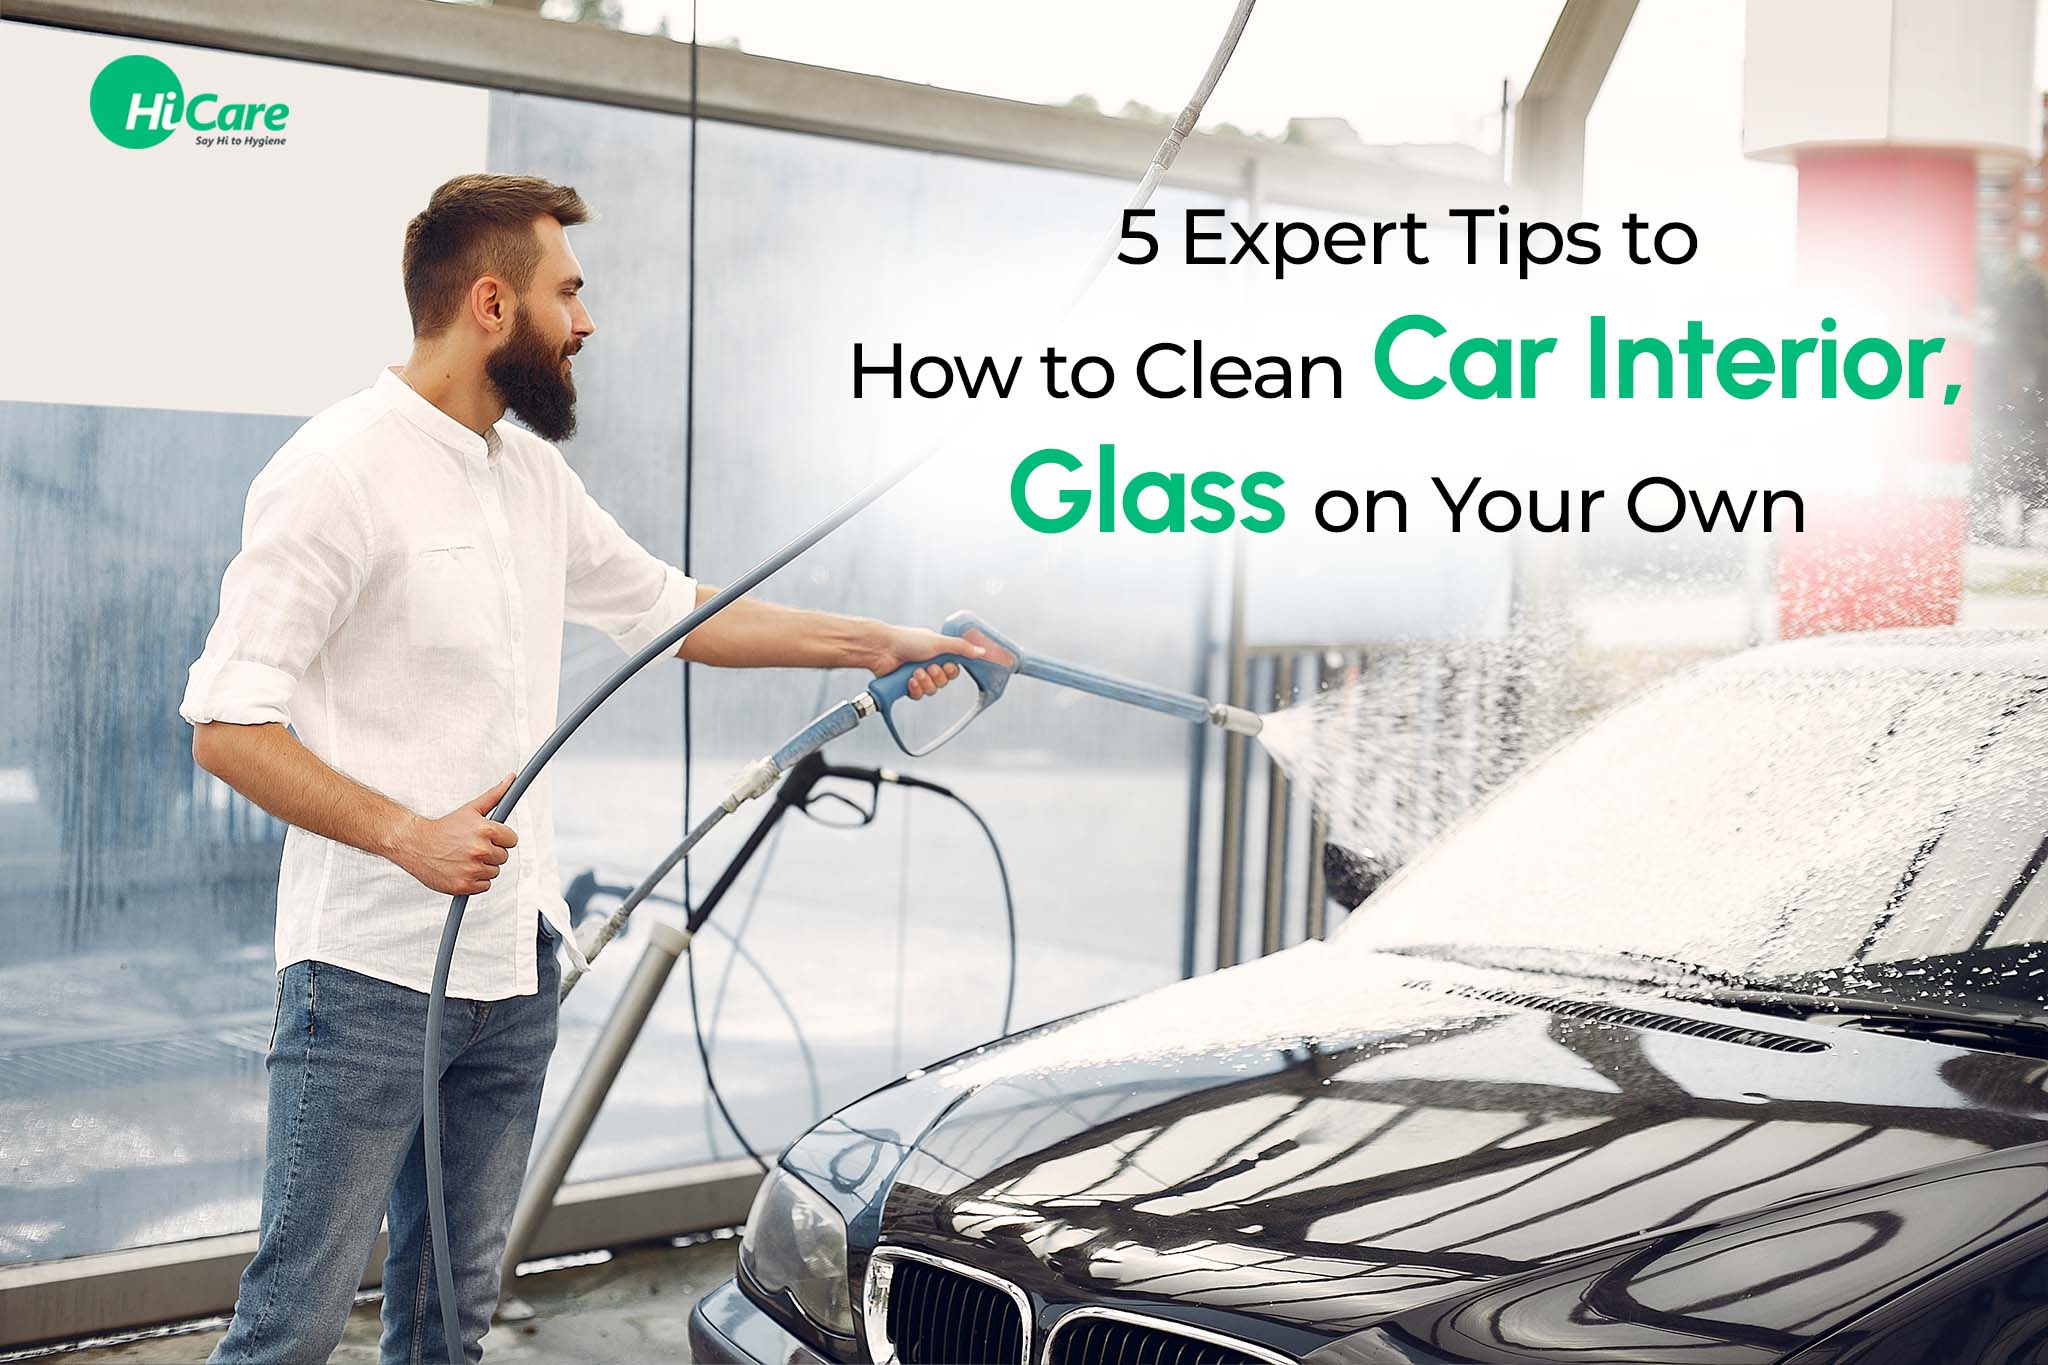 How to clean a car's nooks and crannies